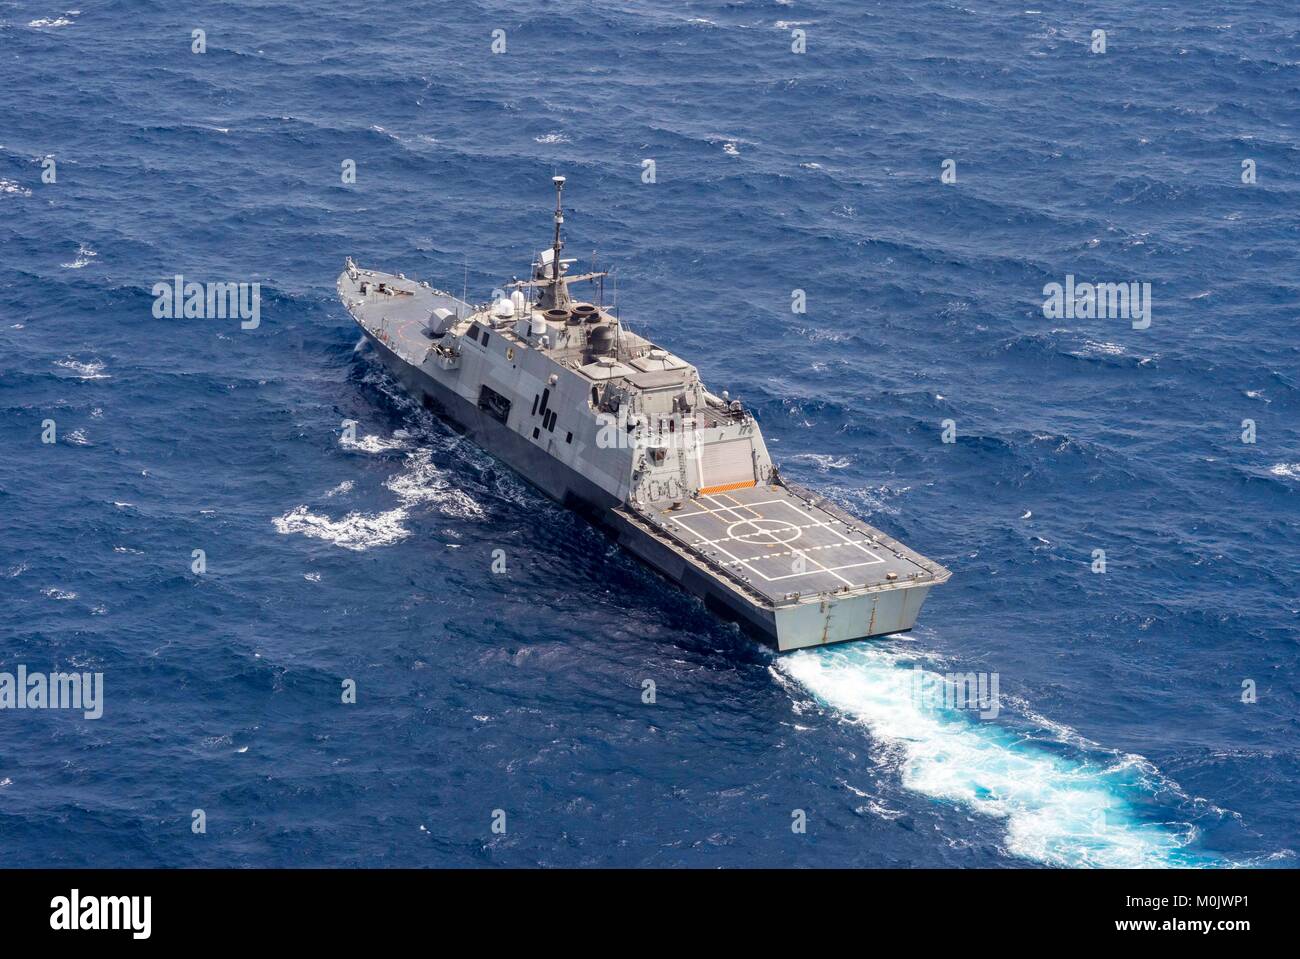 The U.S. Navy Freedom-class littoral combat ship USS Fort Worth steams underway July 7, 2015 in the South China Sea. Stock Photo